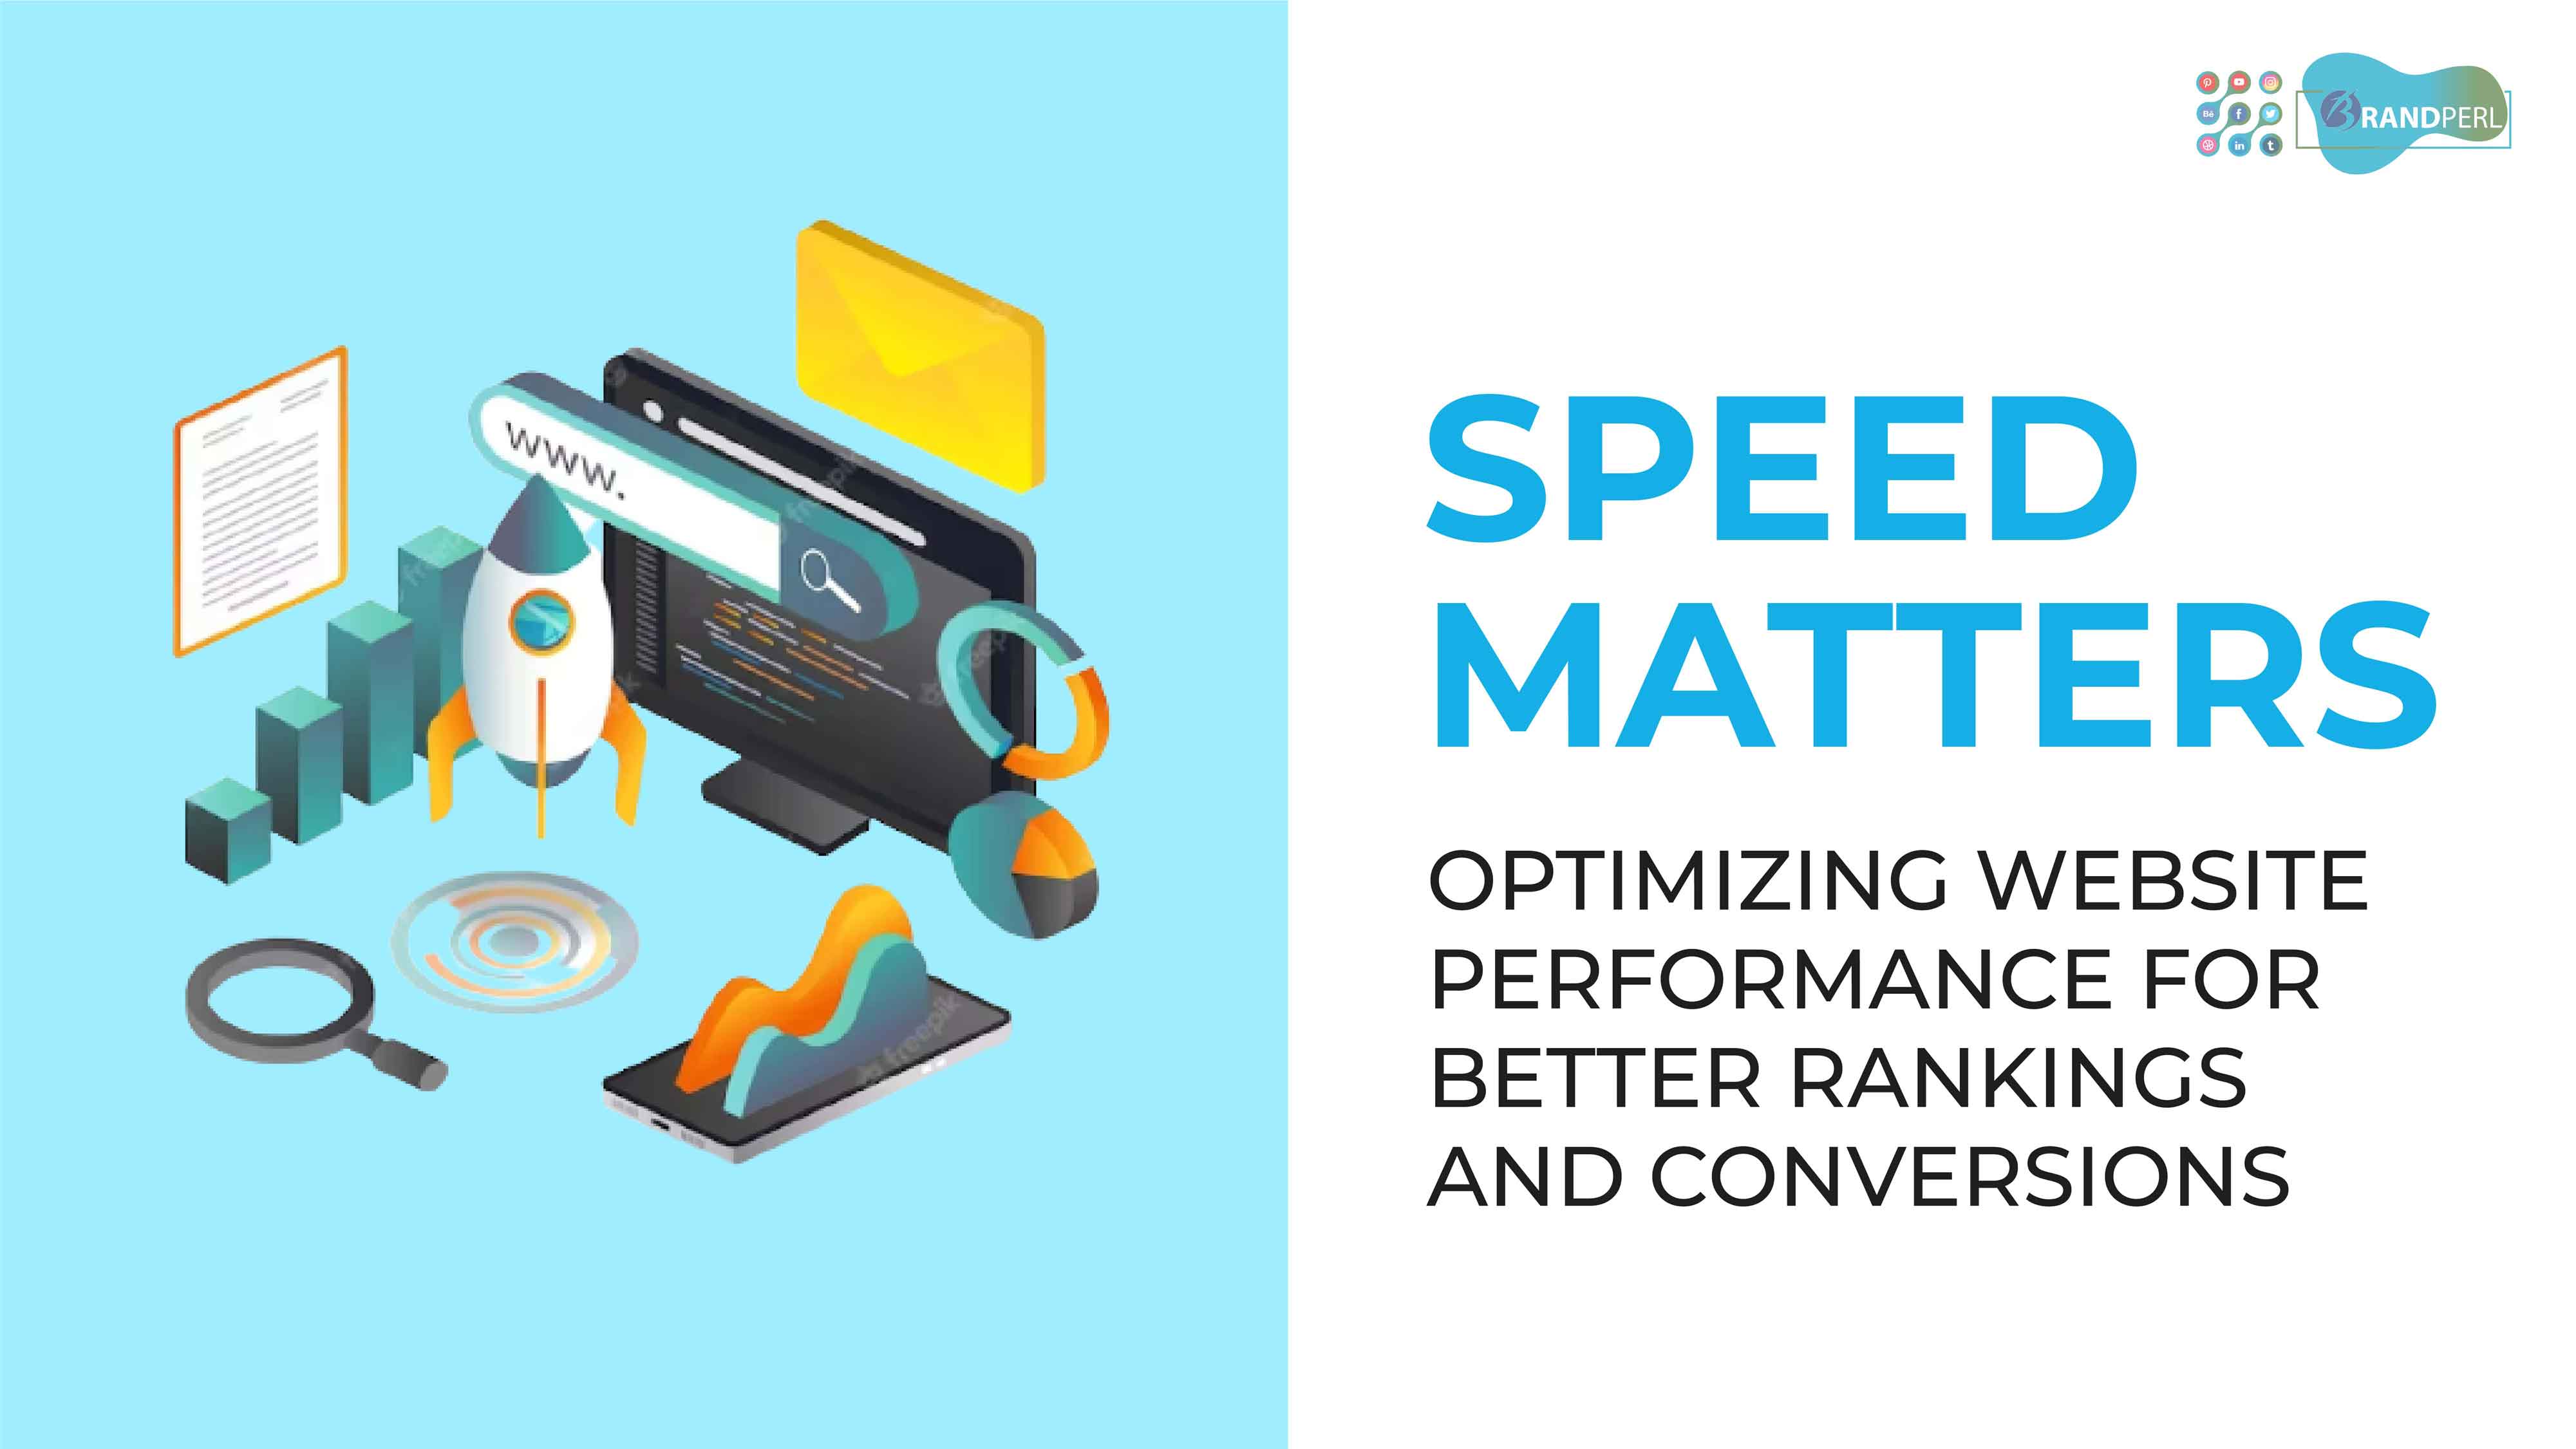 Speed Matters optimizing Website Performance for Better Rankings and Conversions